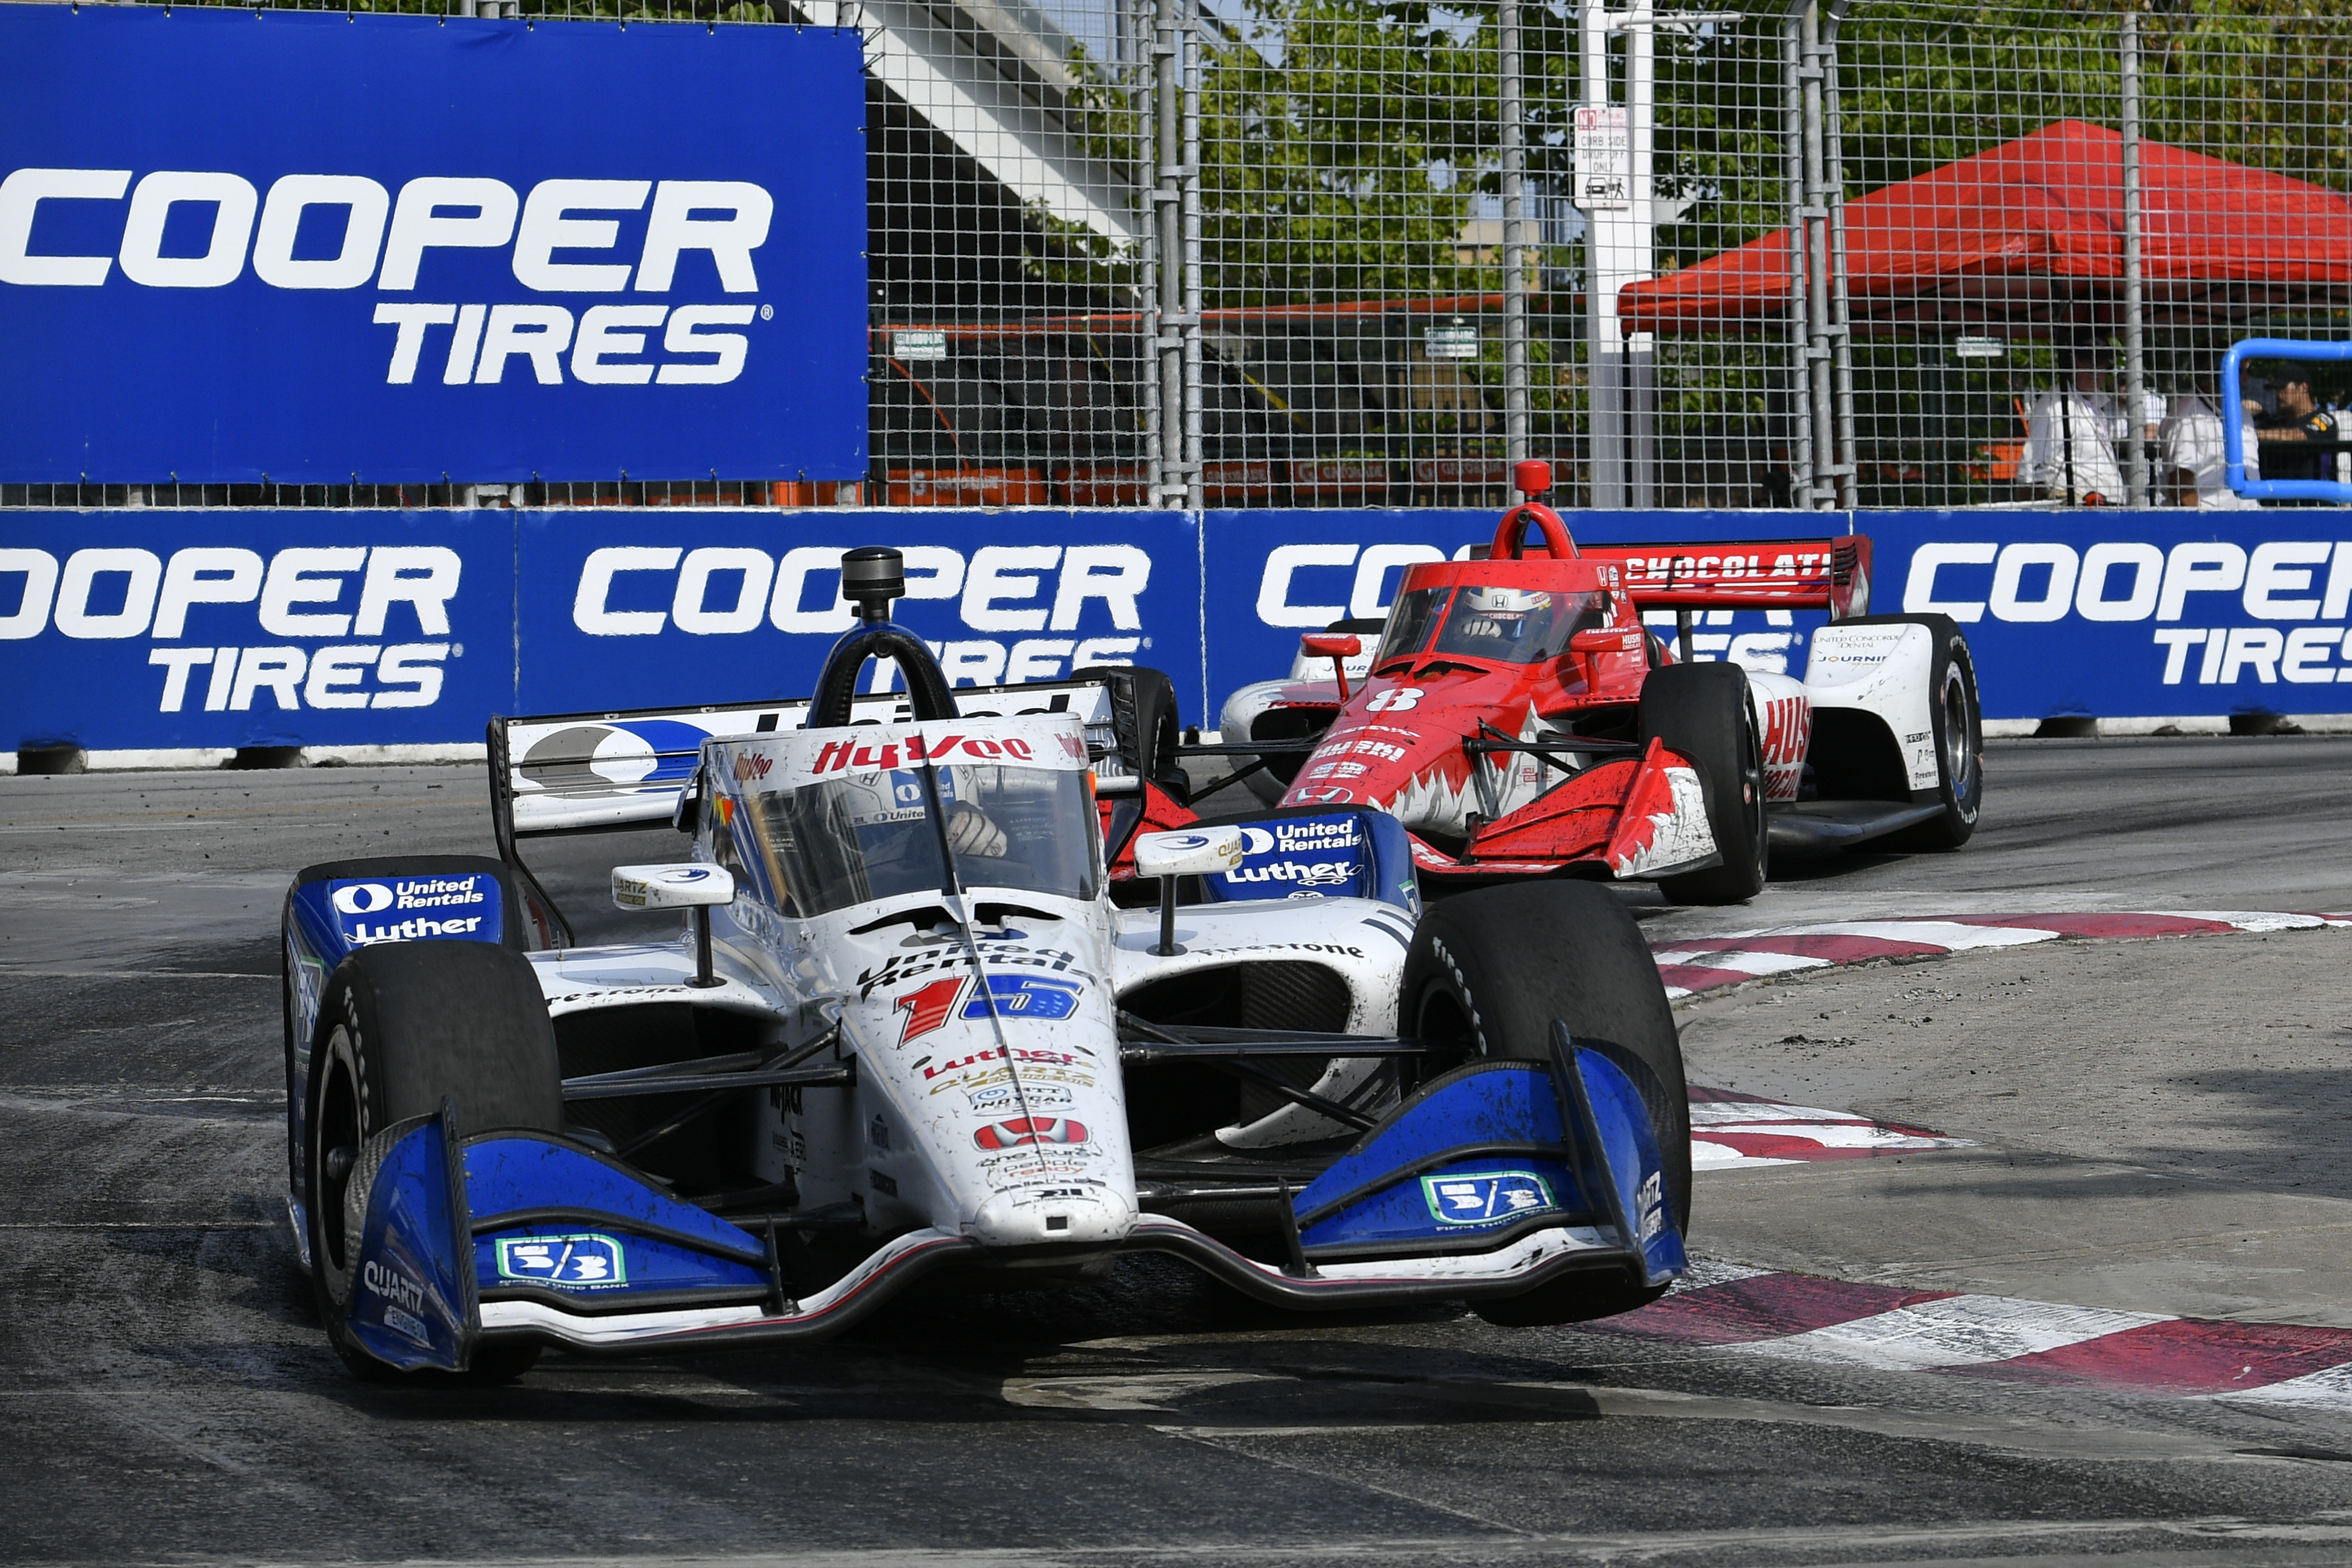 Sebastien Bourdais crossing the finish line with sponsor signage in the background